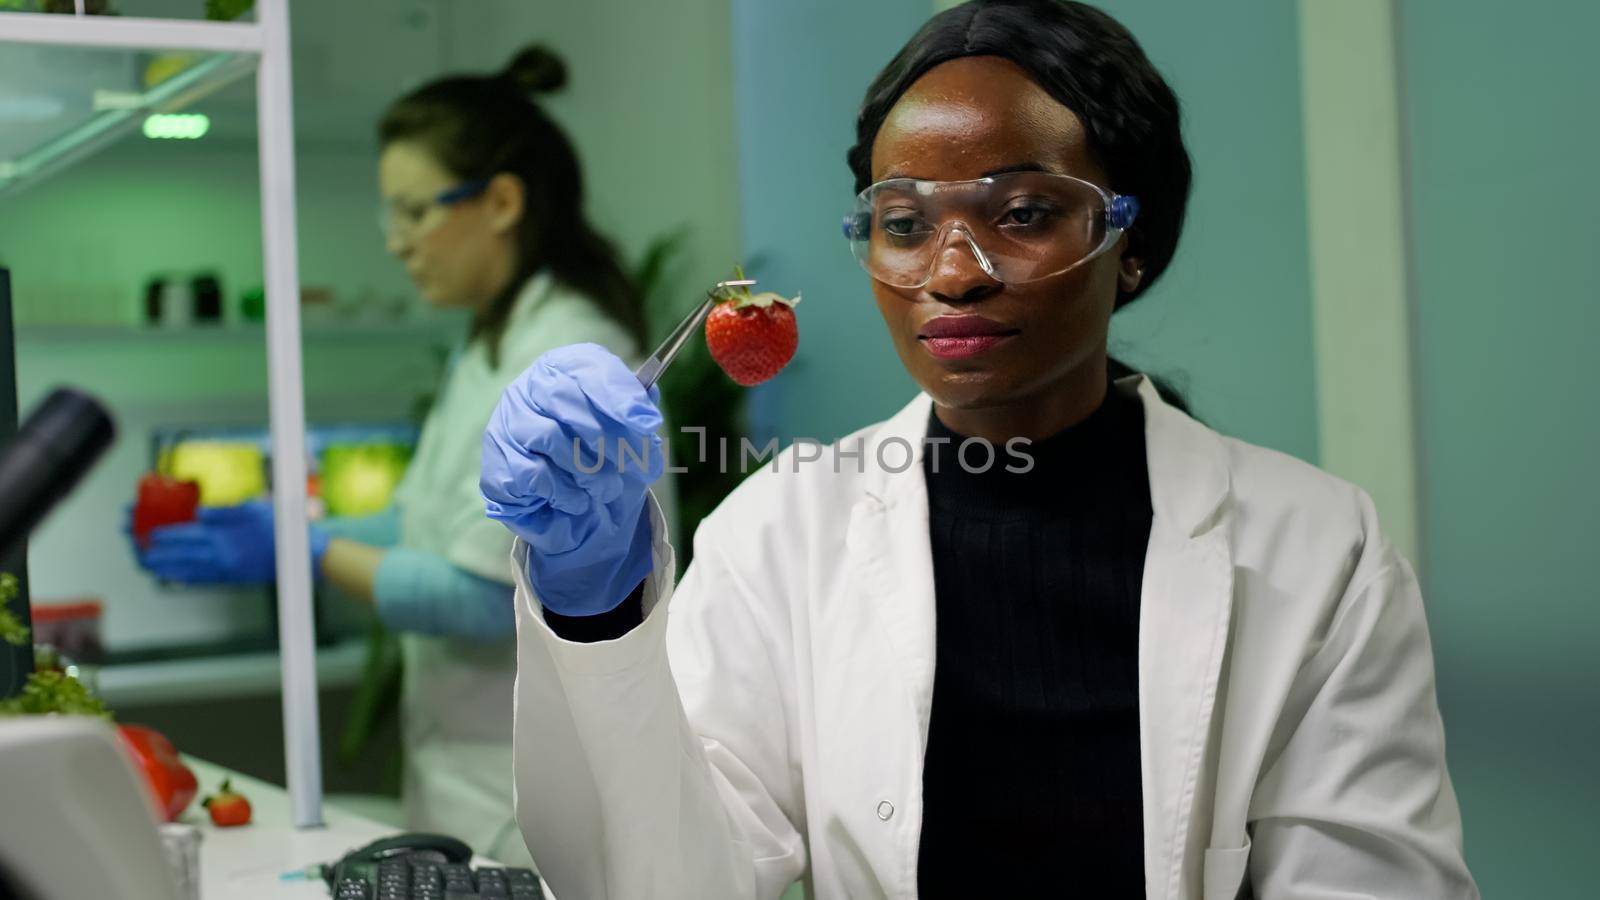 African biologist holding strawberry injected with dna liquid with medical tweezers checking health of fruits. In background her collegue researching gmo test on computer while working in farming lab